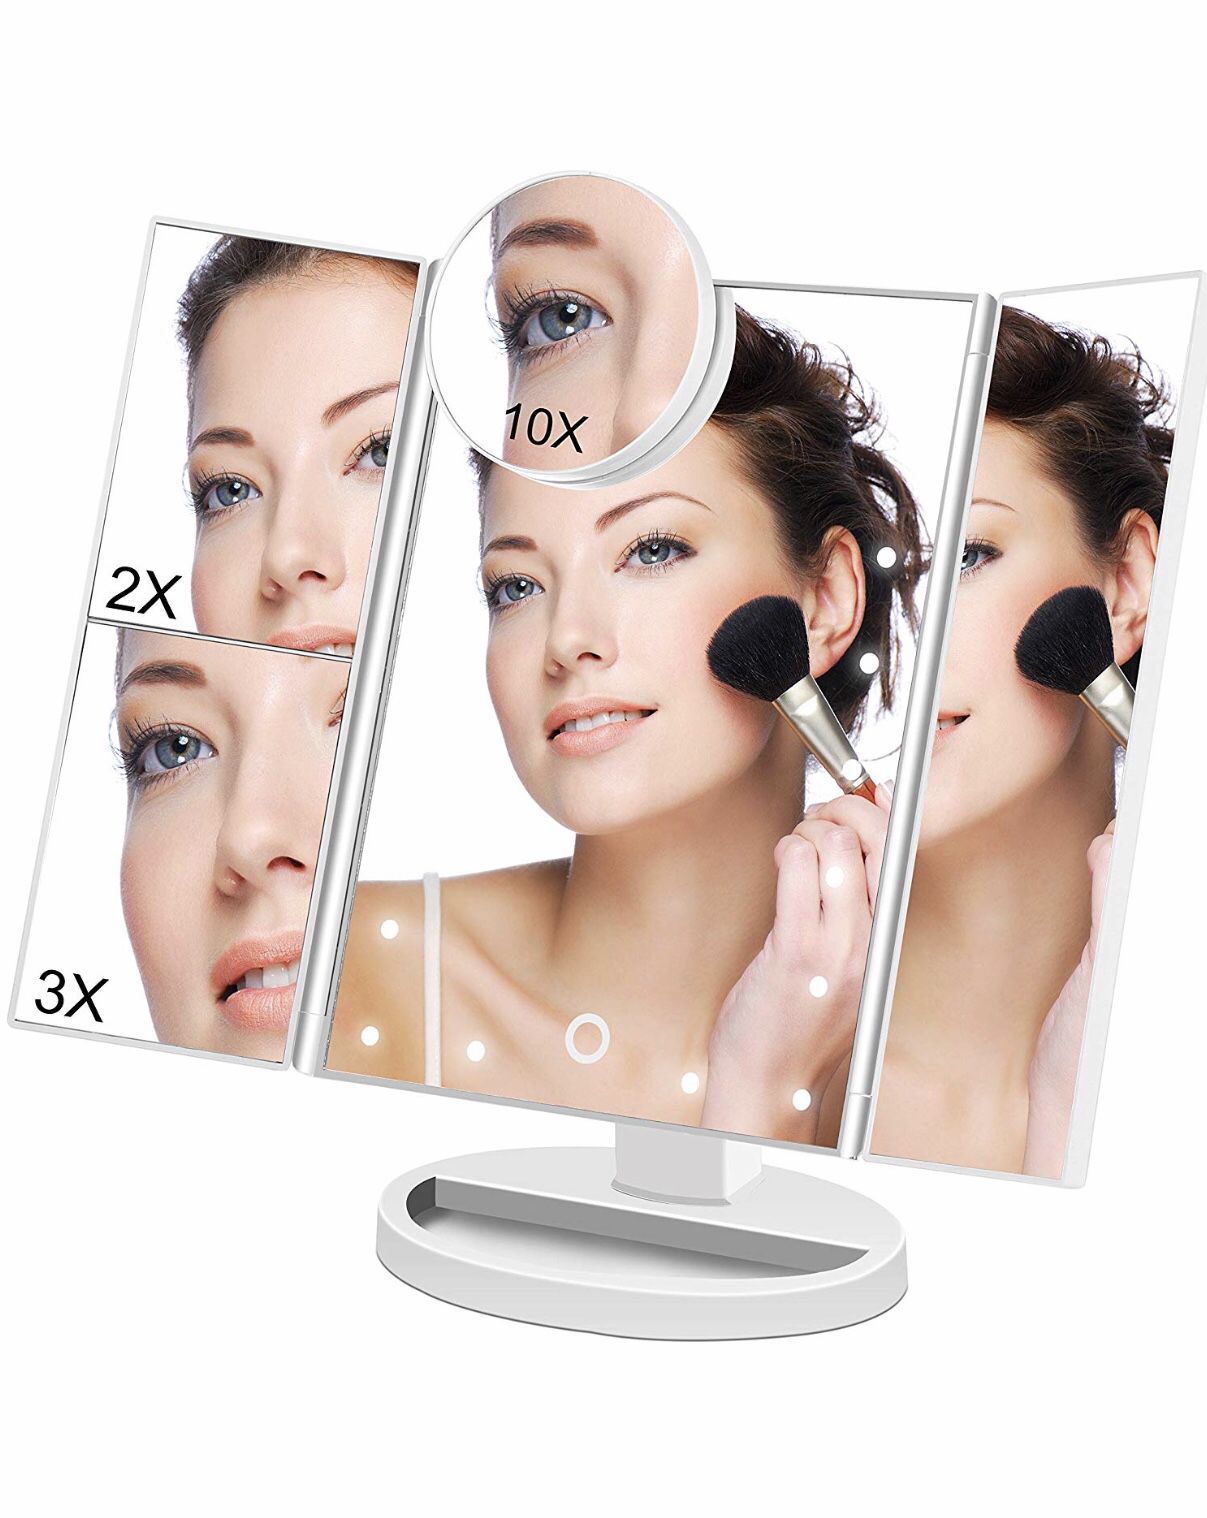 Brand new in box white Makeup Vanity Cosmetic Mirror 21 LED Lights, LED Lighted Table Makeup Mirror Touch Screen, Portable Travel Cosmetic Mirror 3X/